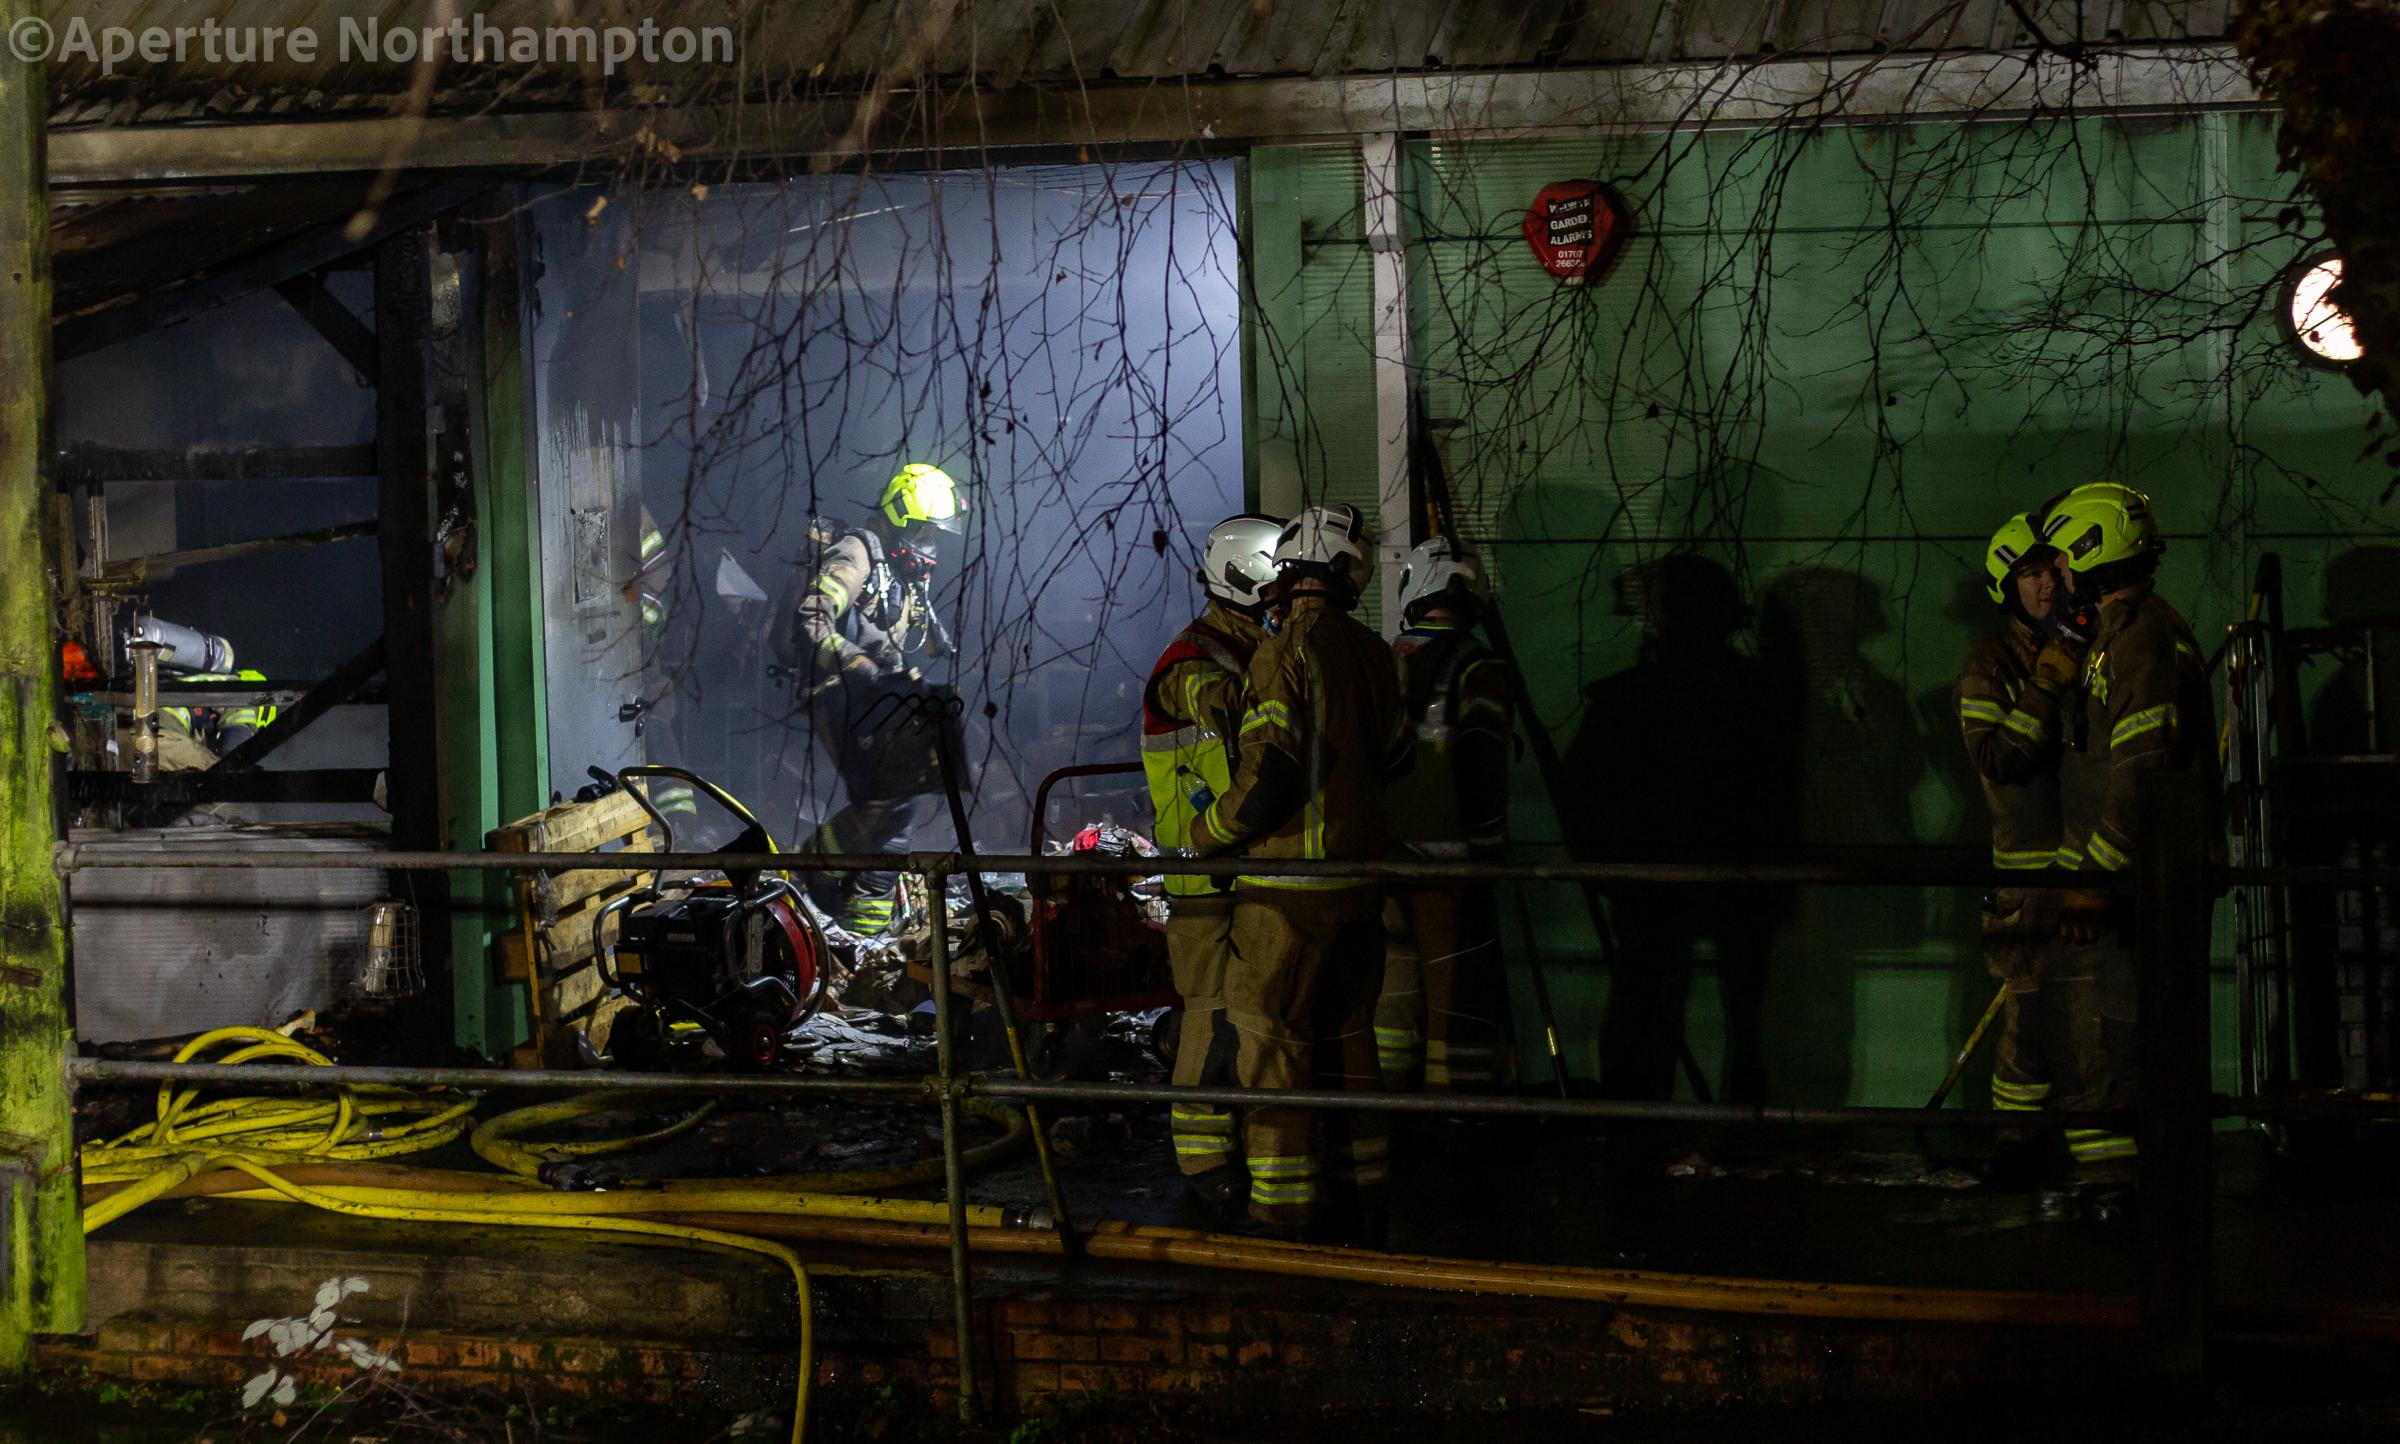 Firefighters tackled the fire by the paper mill Credit: Aperture Northampton News Team